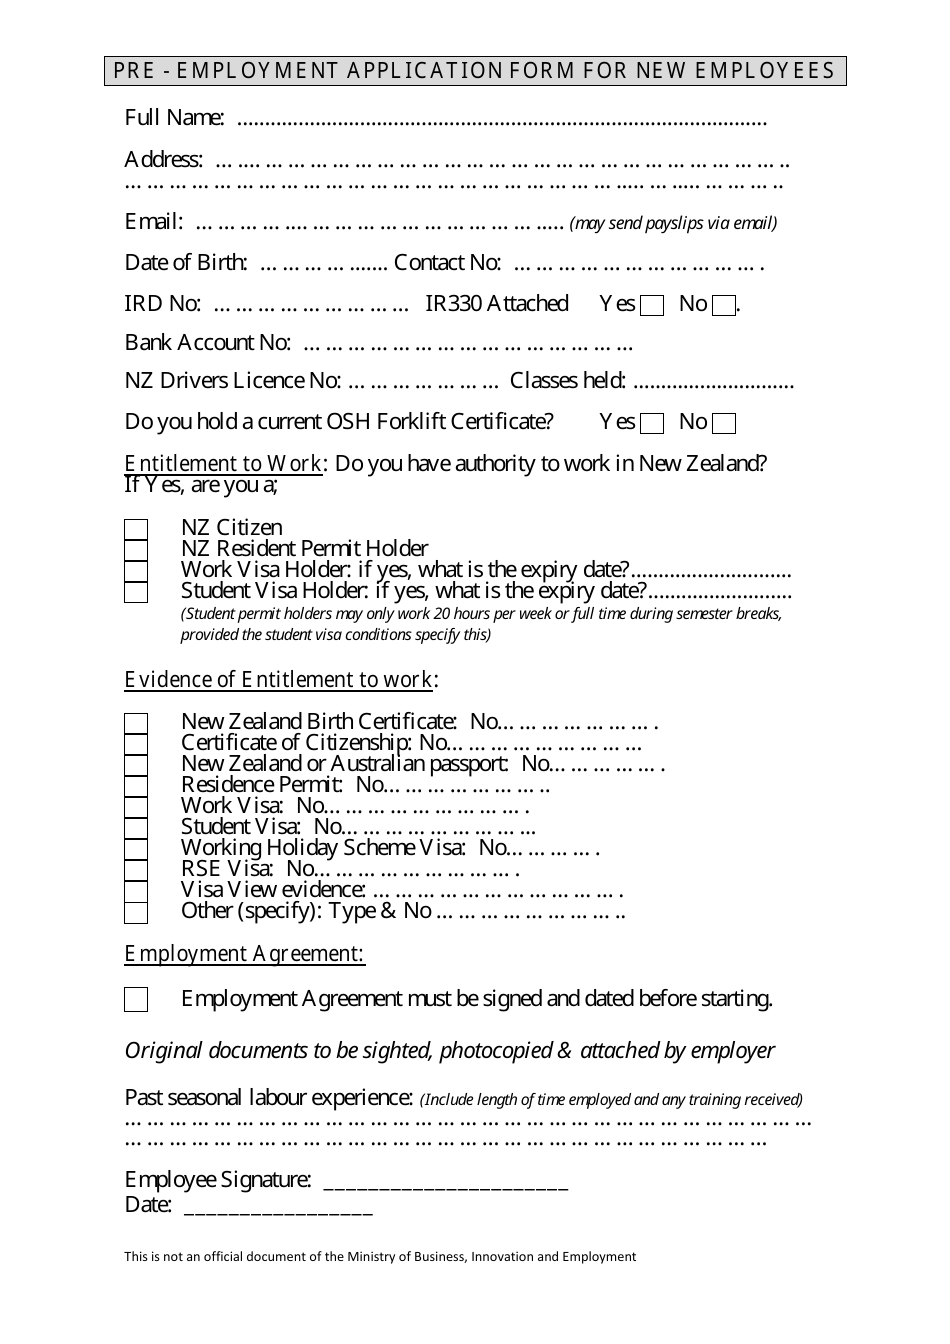 Pre-employment Application Form for New Employees Template, Page 1